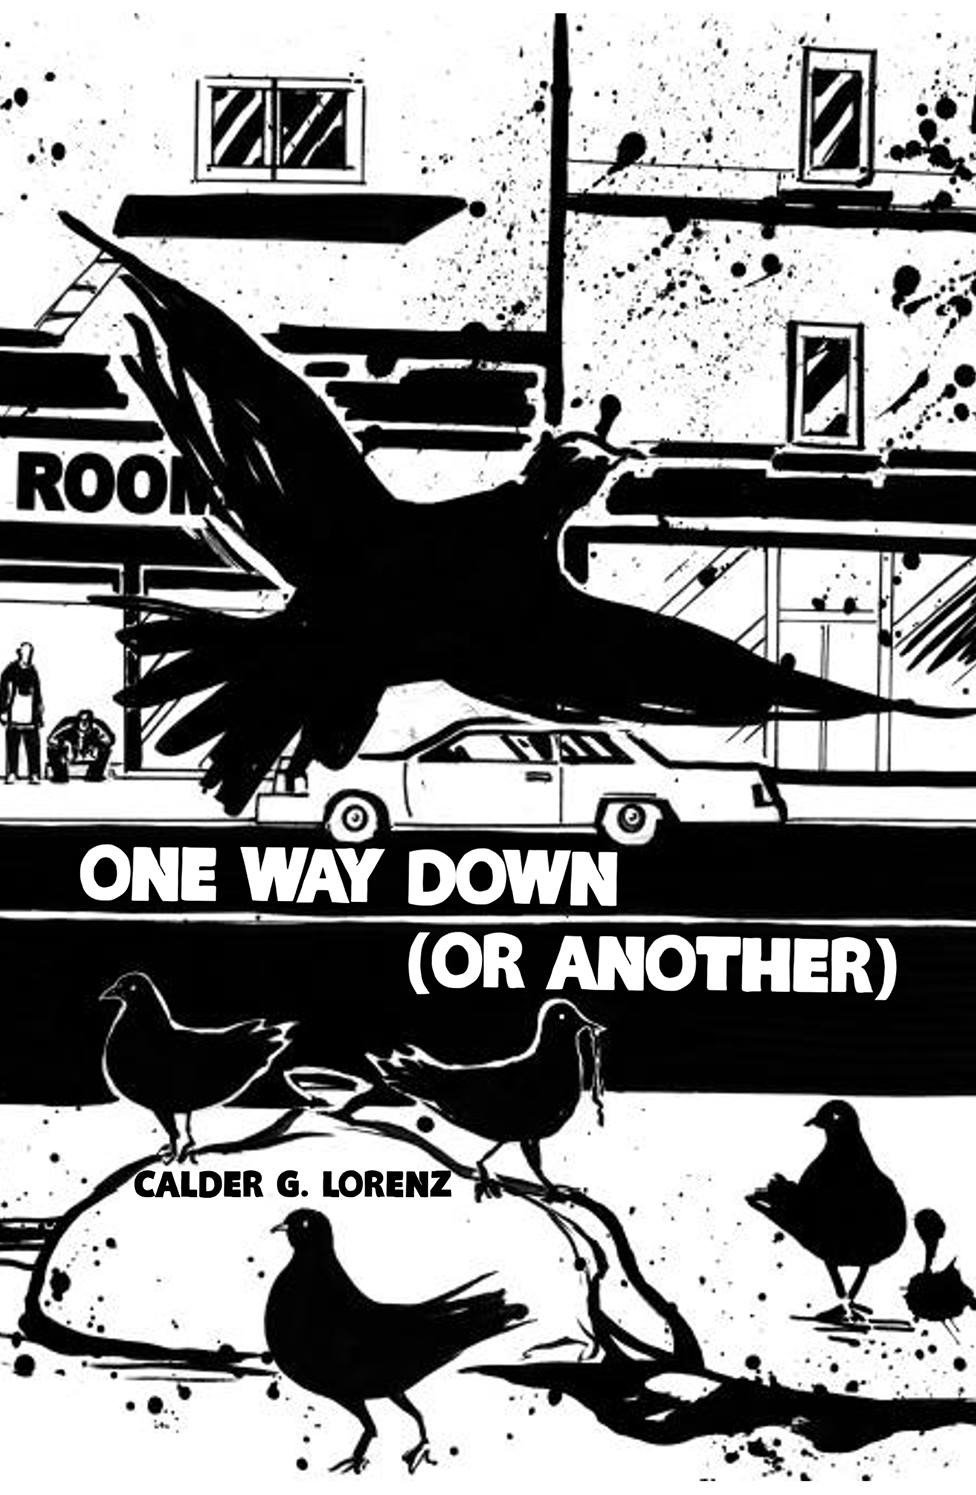 Sad Little Dream: A Review of Calder G. Lorenz’s <i>One Way Down (Or Another)</i>